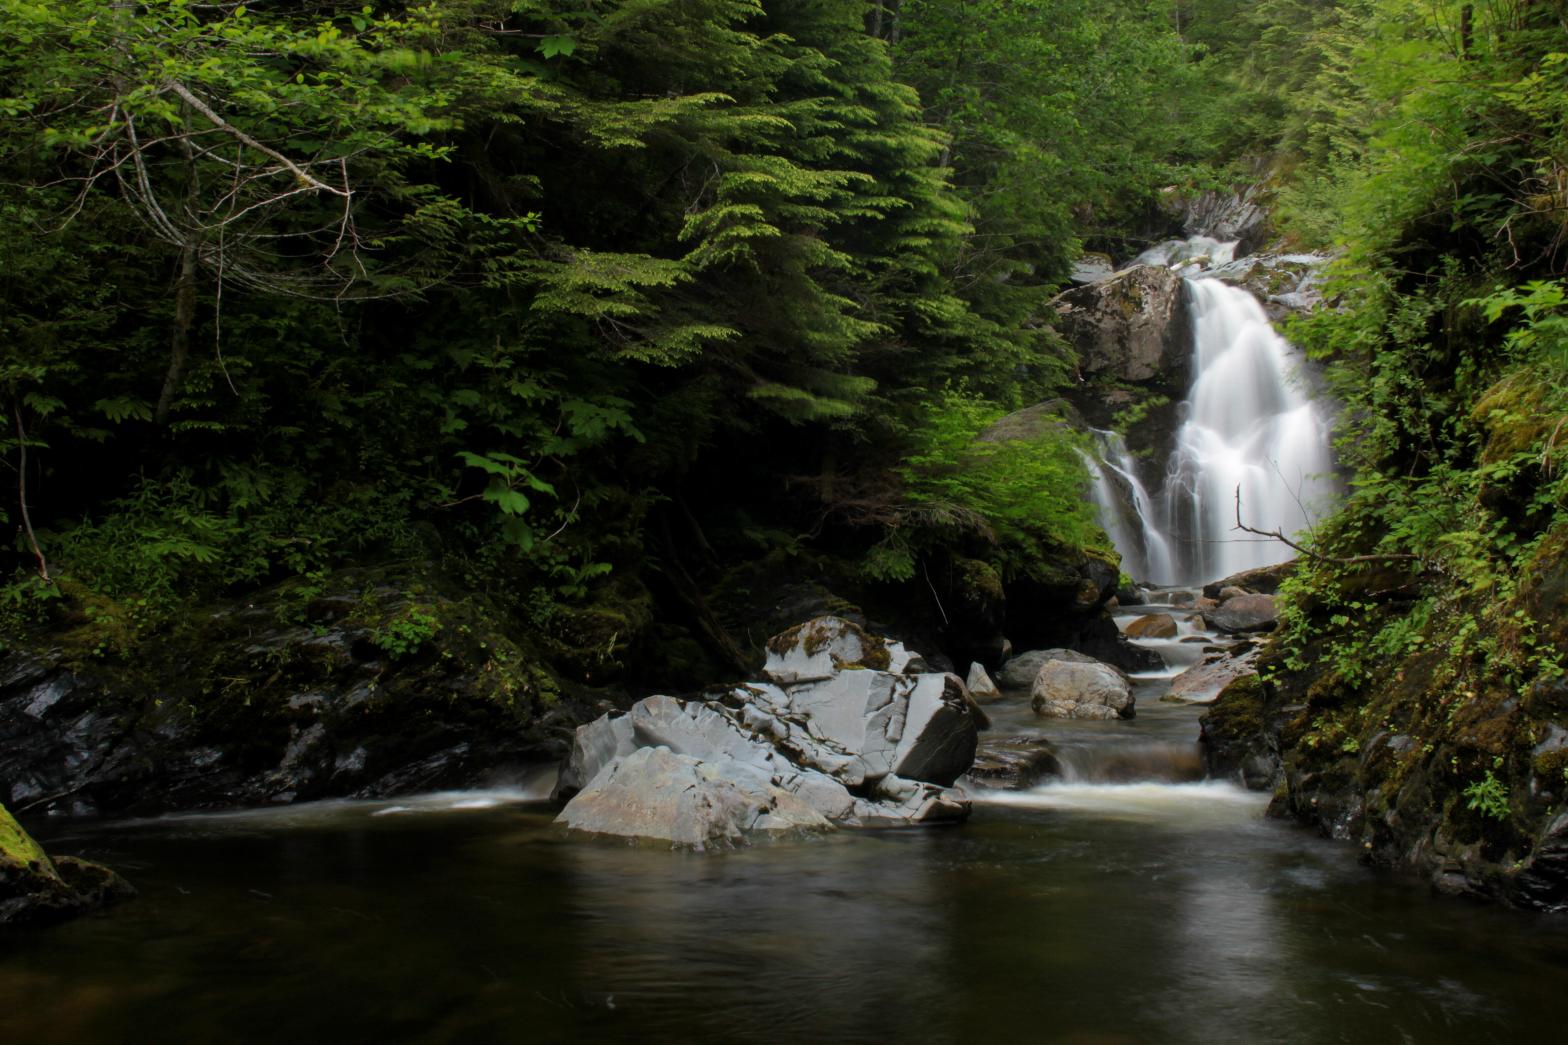 First view of Adsaloos Falls from downstream